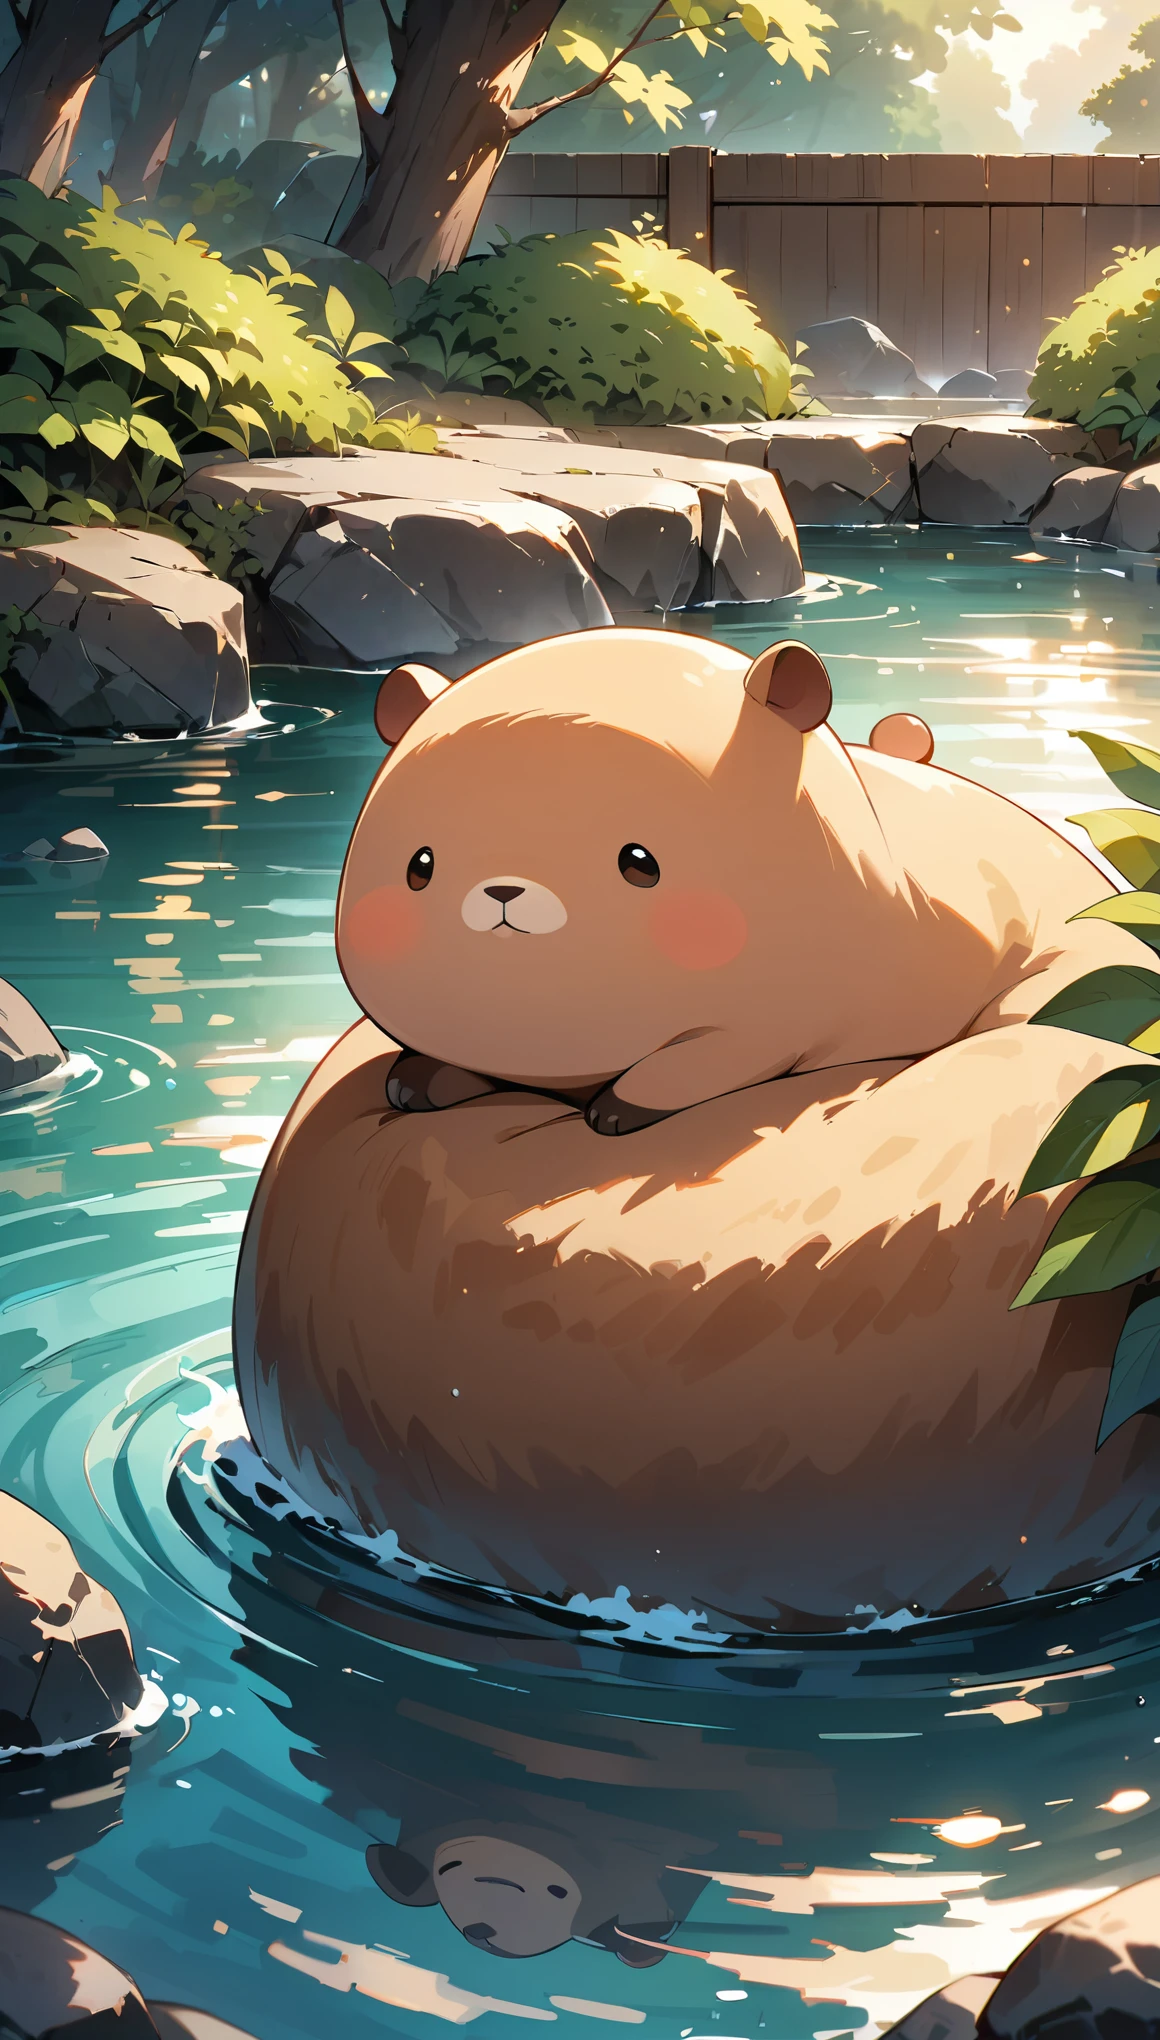 ((Hot springs with capybaras))、1 capybara:1.2、Cozy atmosphere、Rising steam、Lush vegetation、Relaxing bath、Calm colors、Ripples on a calm water surface、Calm atmosphere tranquility、A faint mist in the air、A sense of harmony and serenity、A delightful encounter with nature、A relaxing experience、A moment of blissful escape。 (highest quality、4k、8k、High resolution、masterpiece: 1.2)、Super detailed、(Chibi: 1.37)、Bright colors、Bokeh。